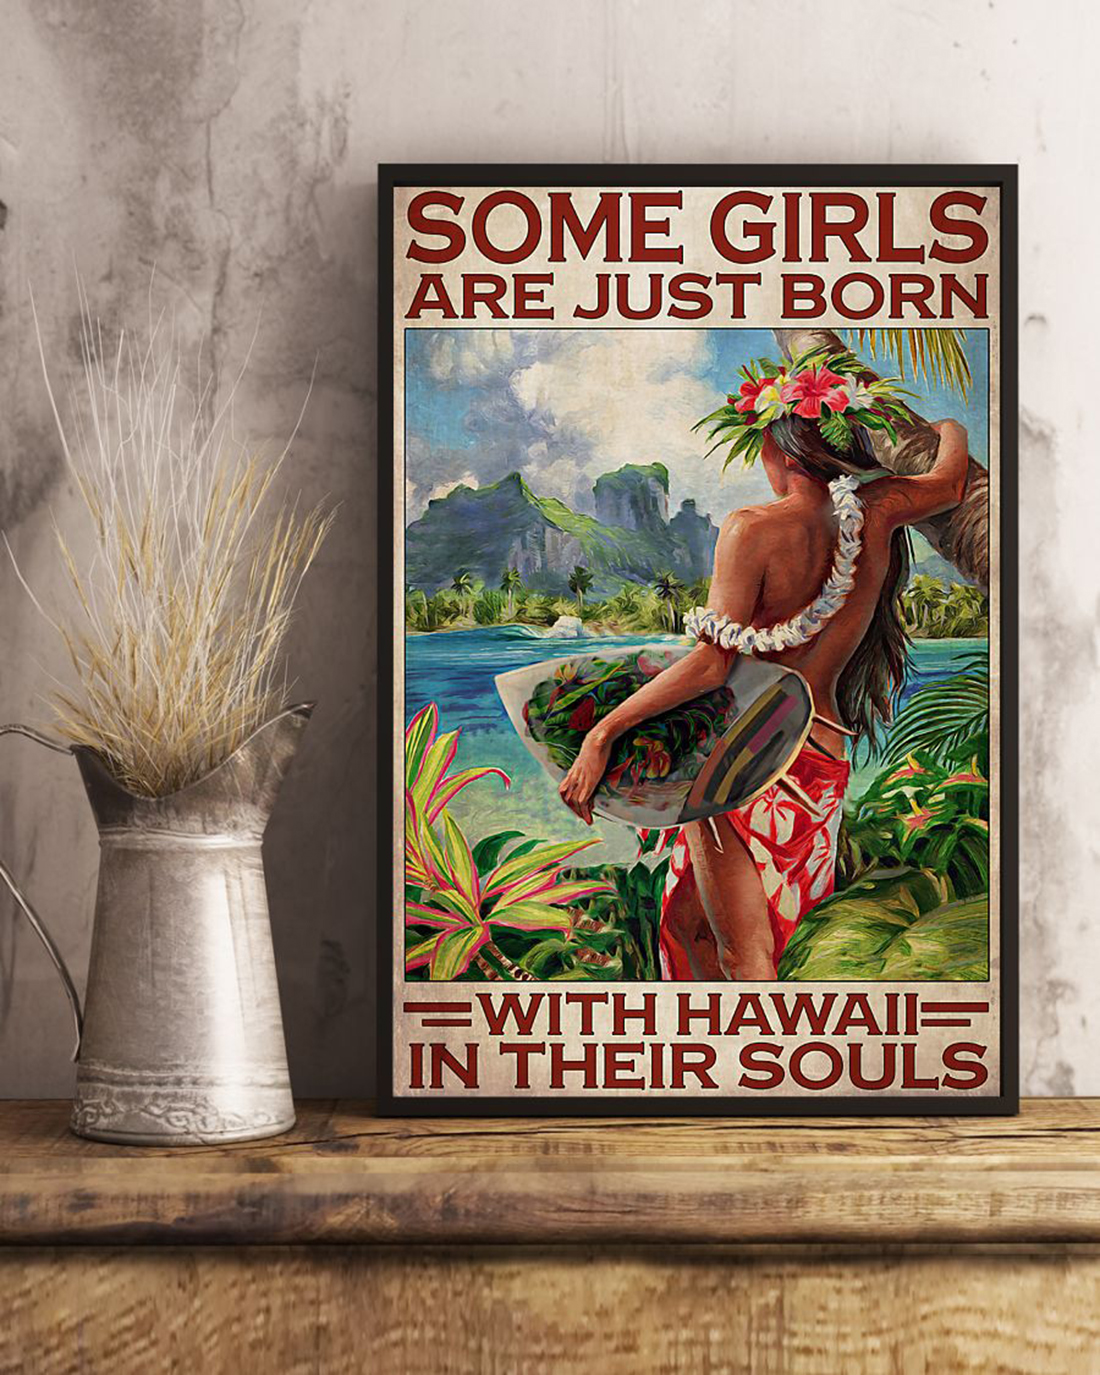 Some girl are just born with hawaii in their souls poster